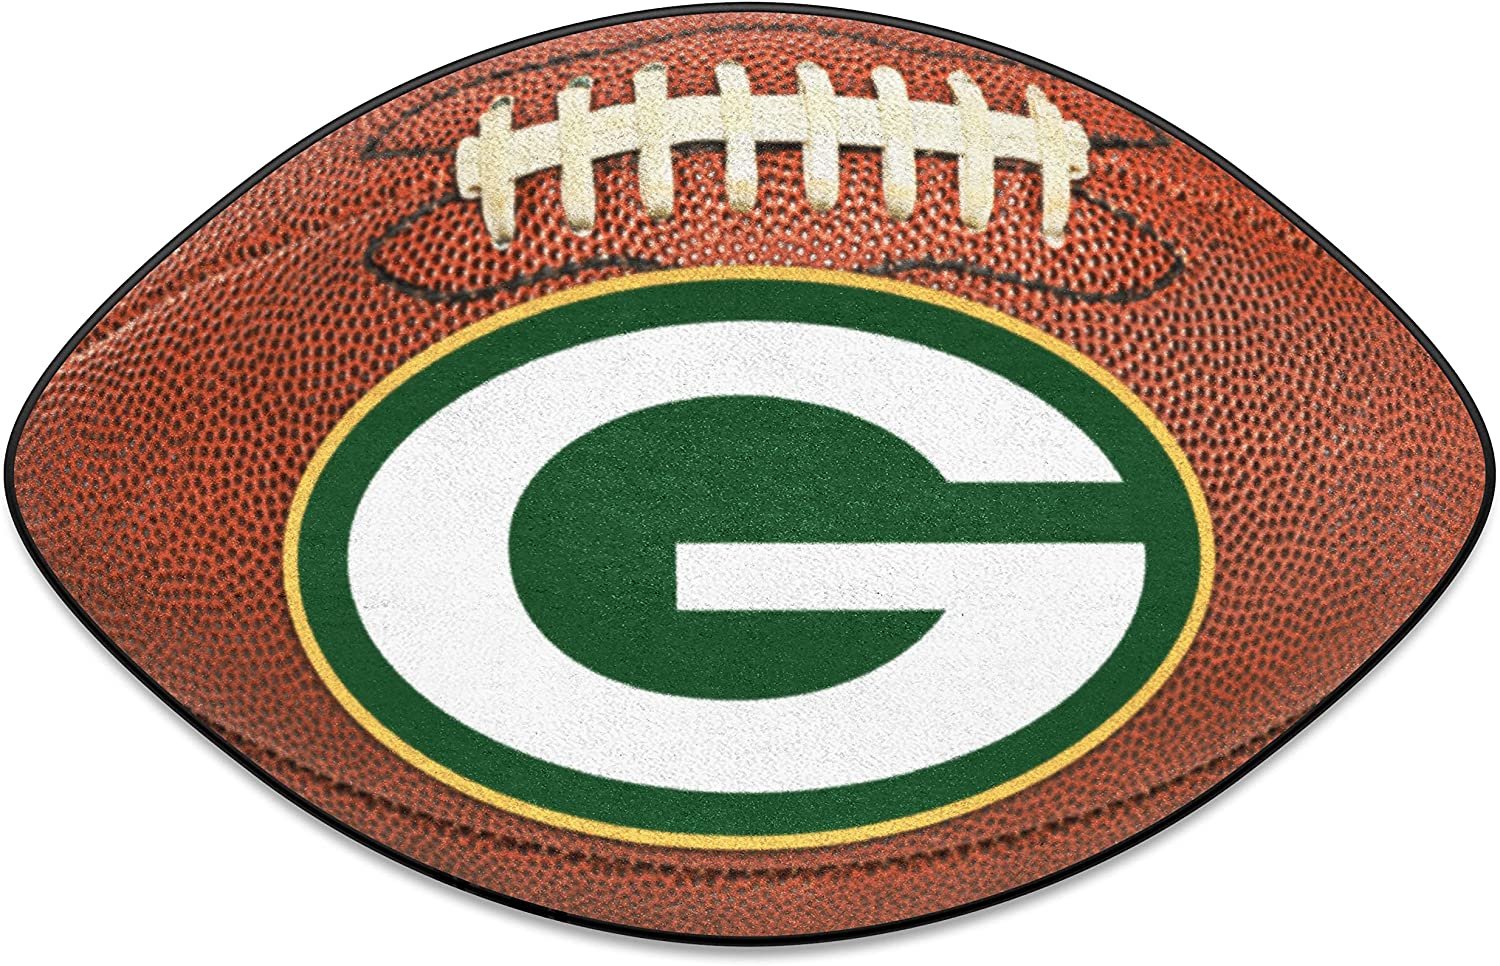 Green Bay Packers Floor Mat Area Rug, 20x32 Inch, Non-Skid Backing, Football Design